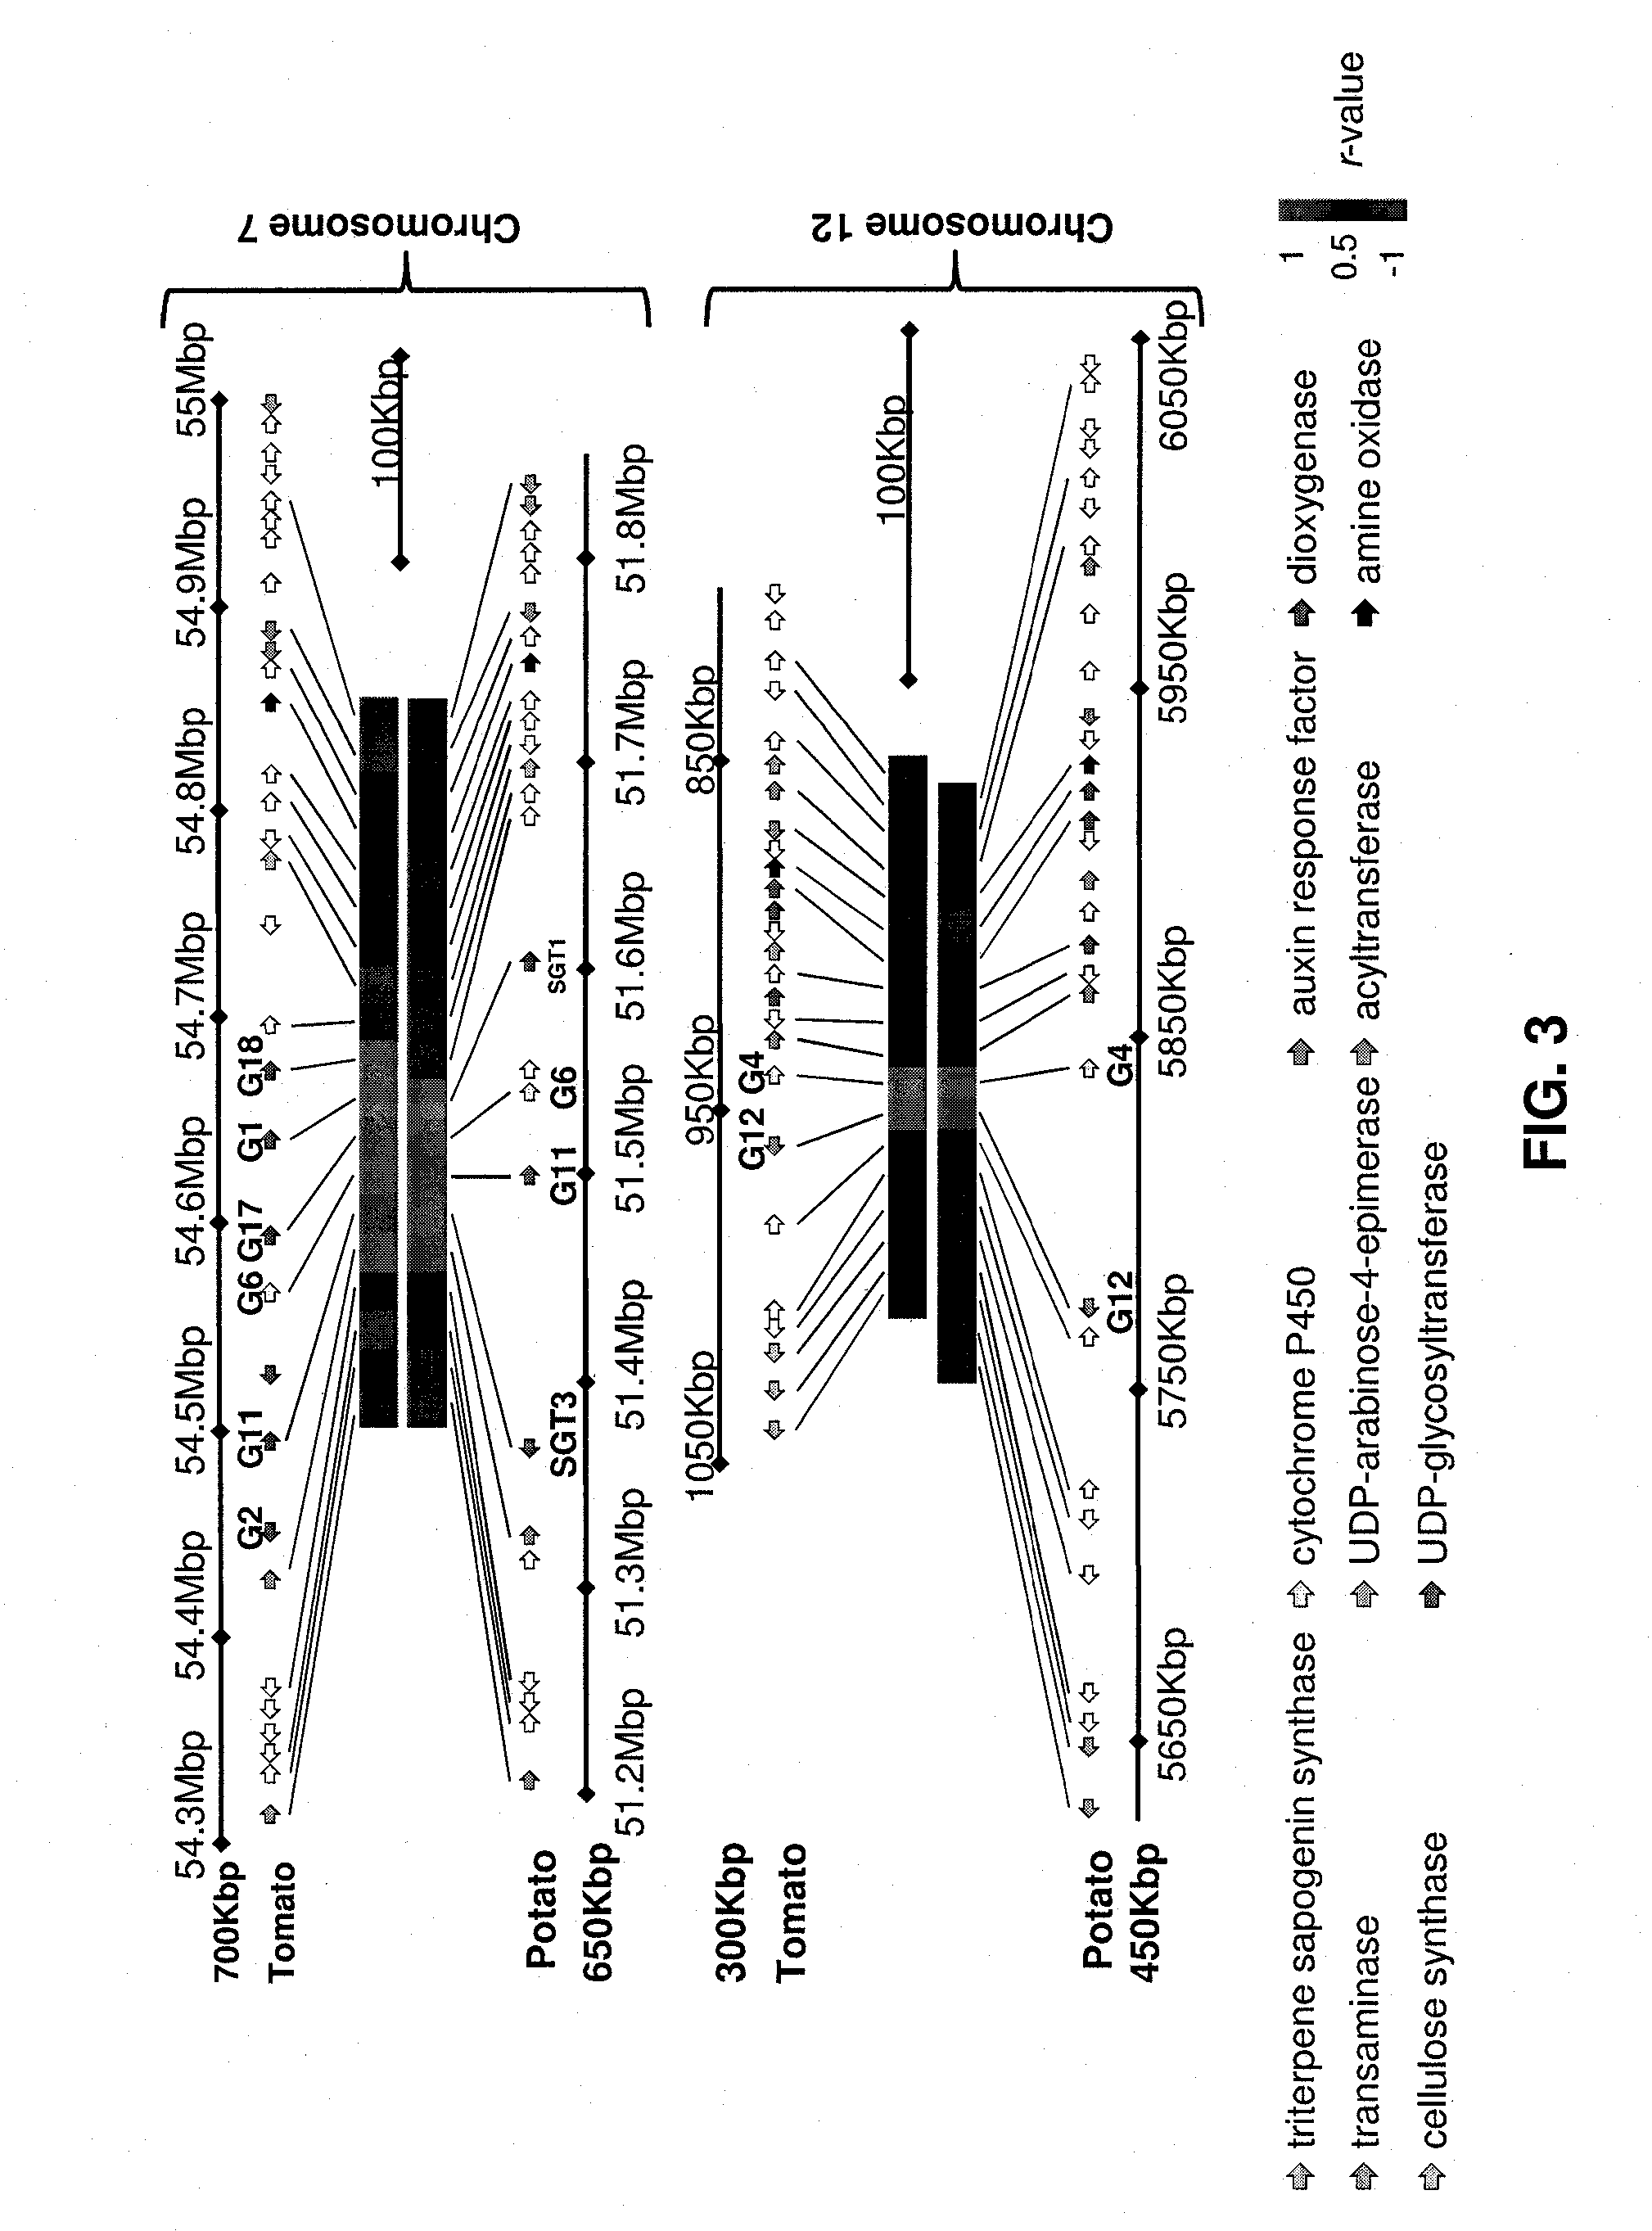 Plant with altered content of steroidal glycoalkaloids